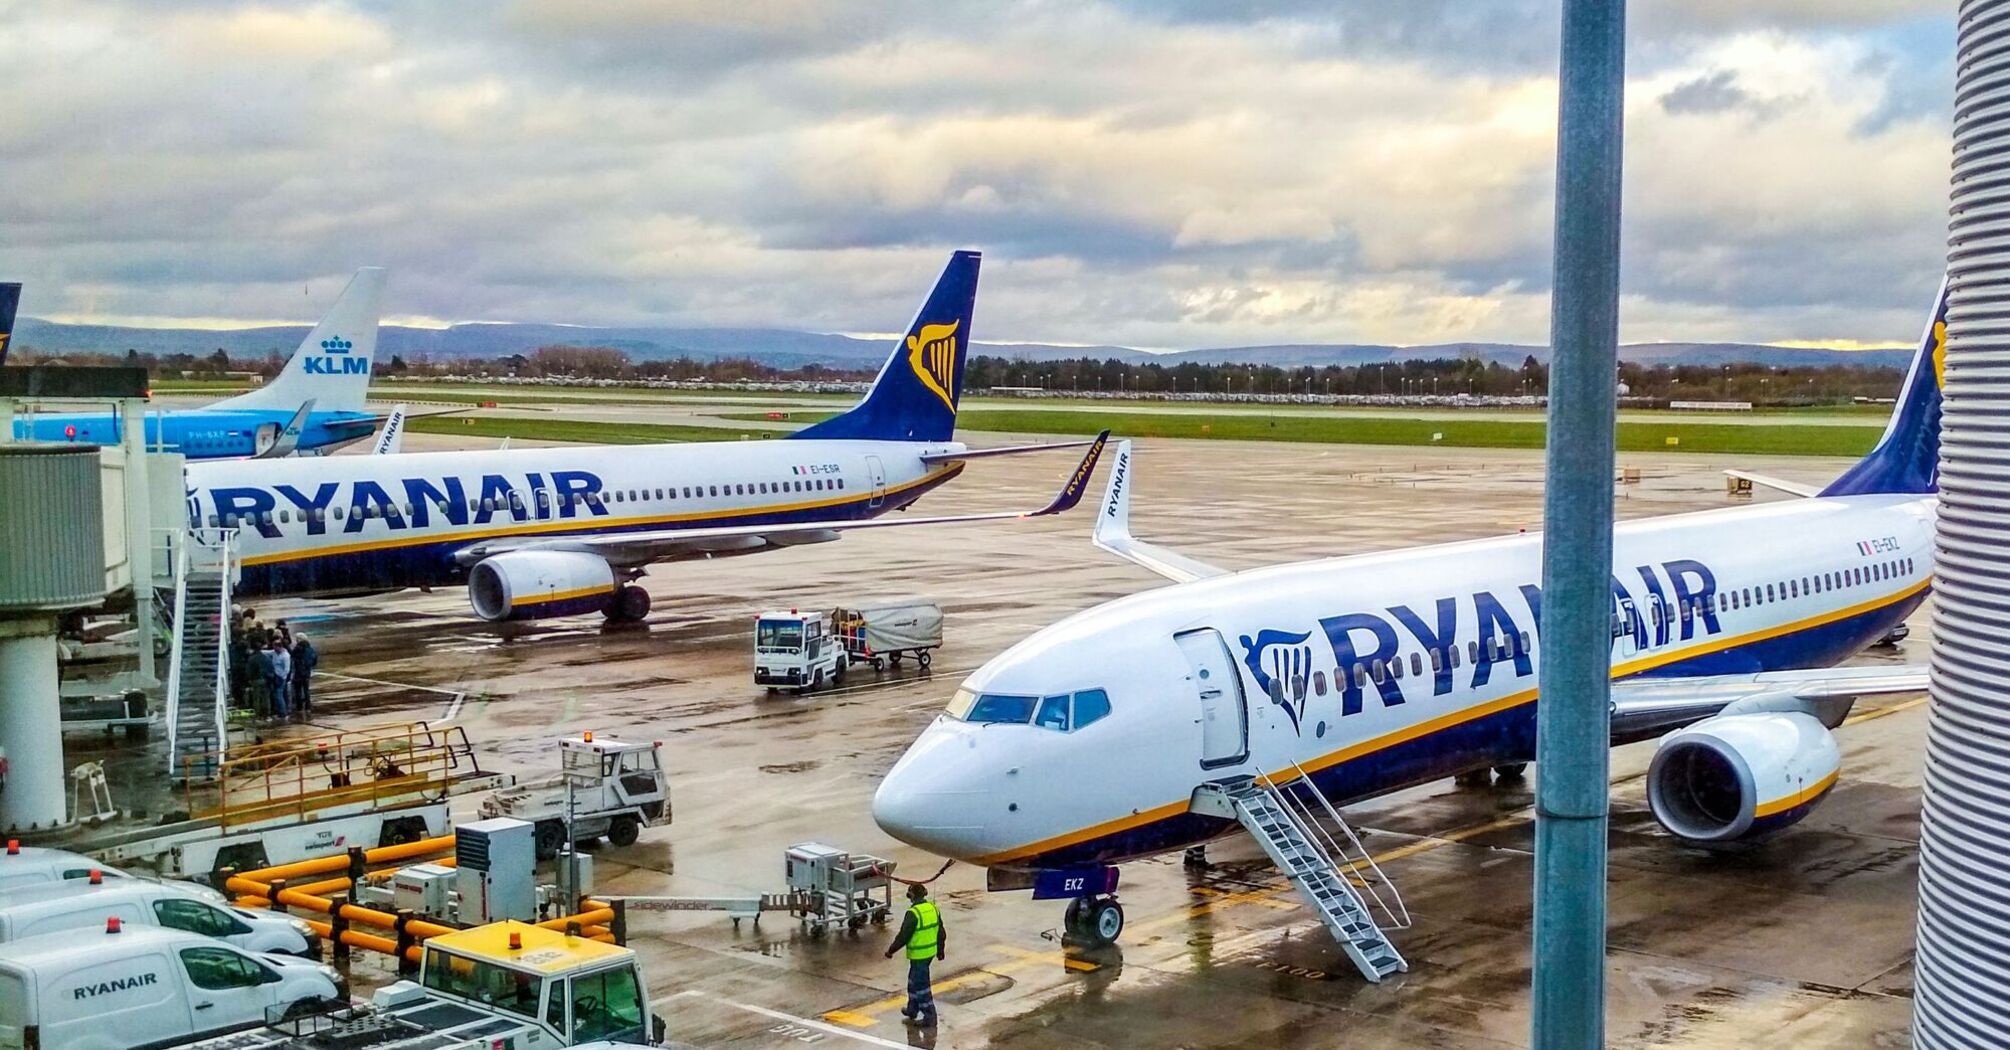 Ryanair has warned about high fares for summer flights